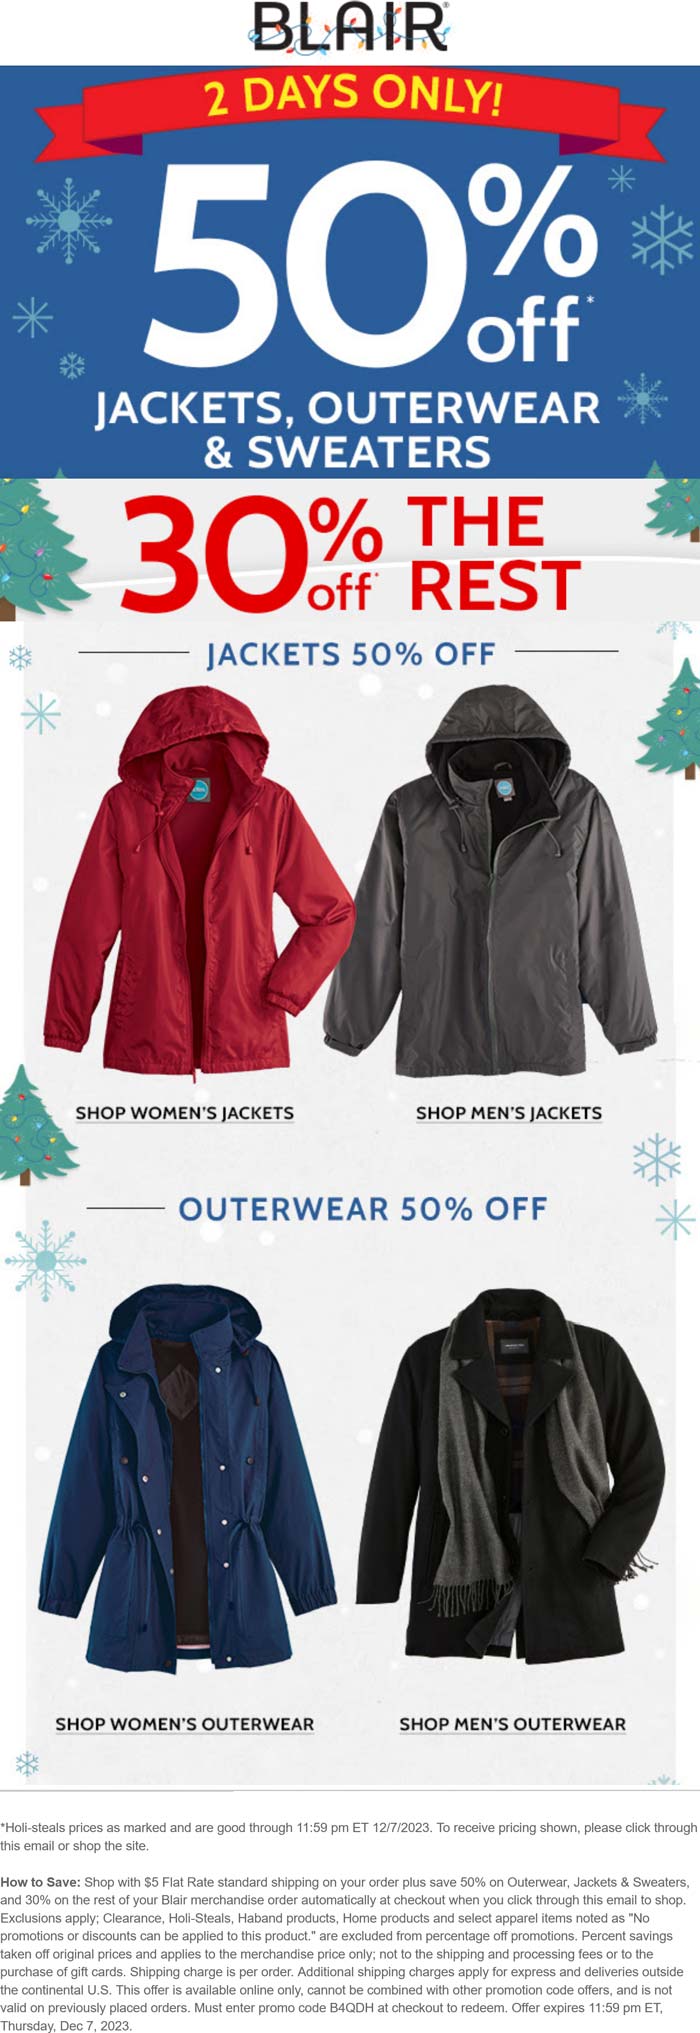 Blair stores Coupon  50% off outerwear & 30% off everything else online at Blair via promo code B4QDH #blair 